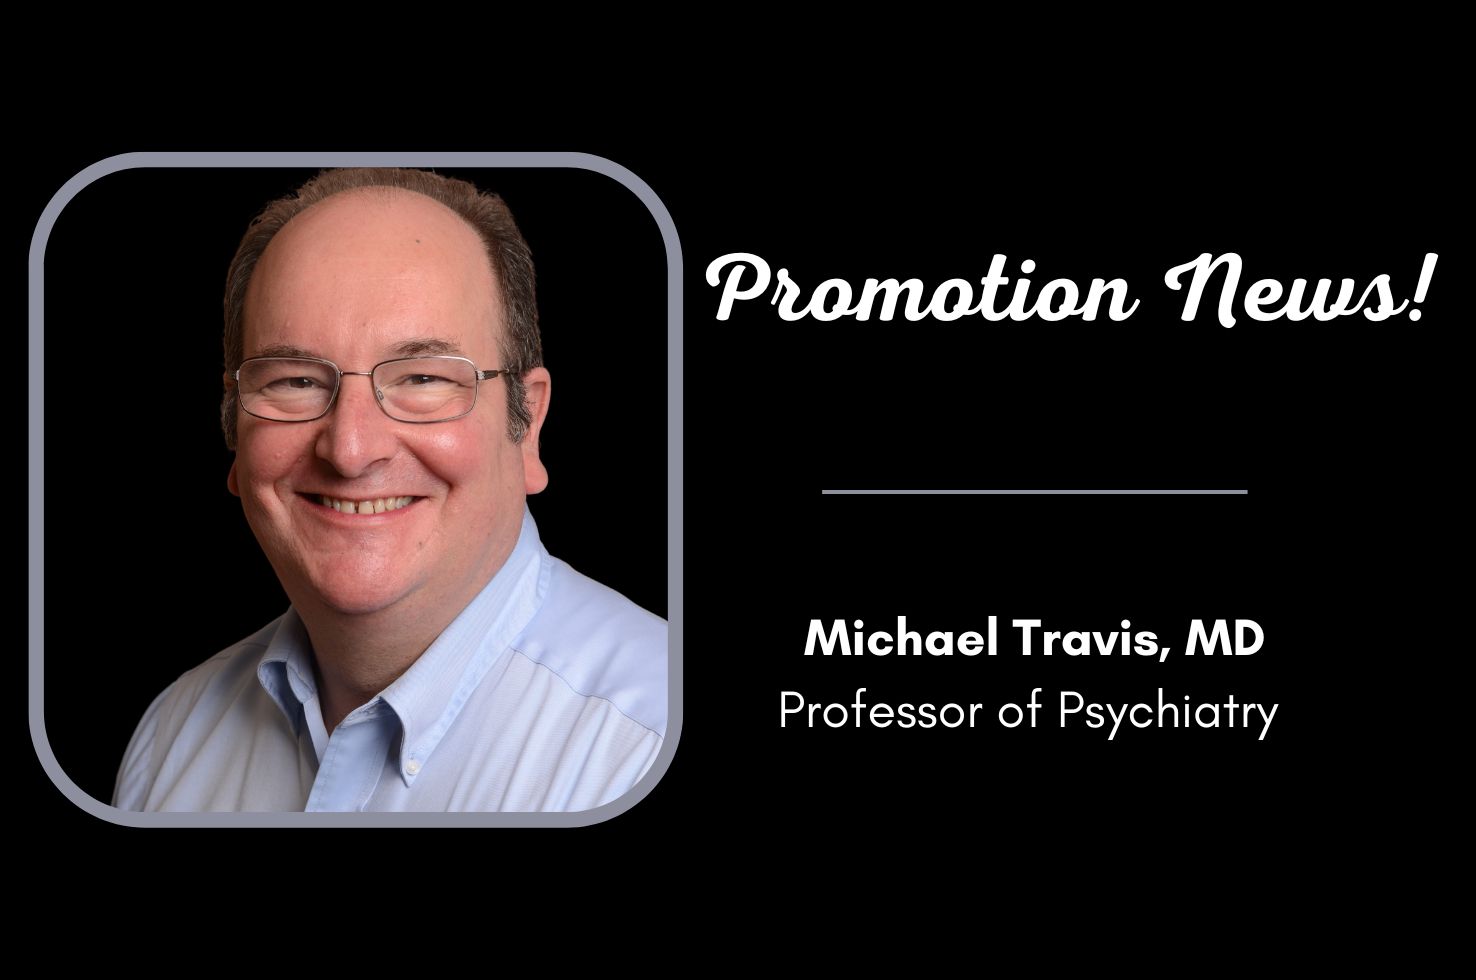 Dr. Michael Travis Promoted